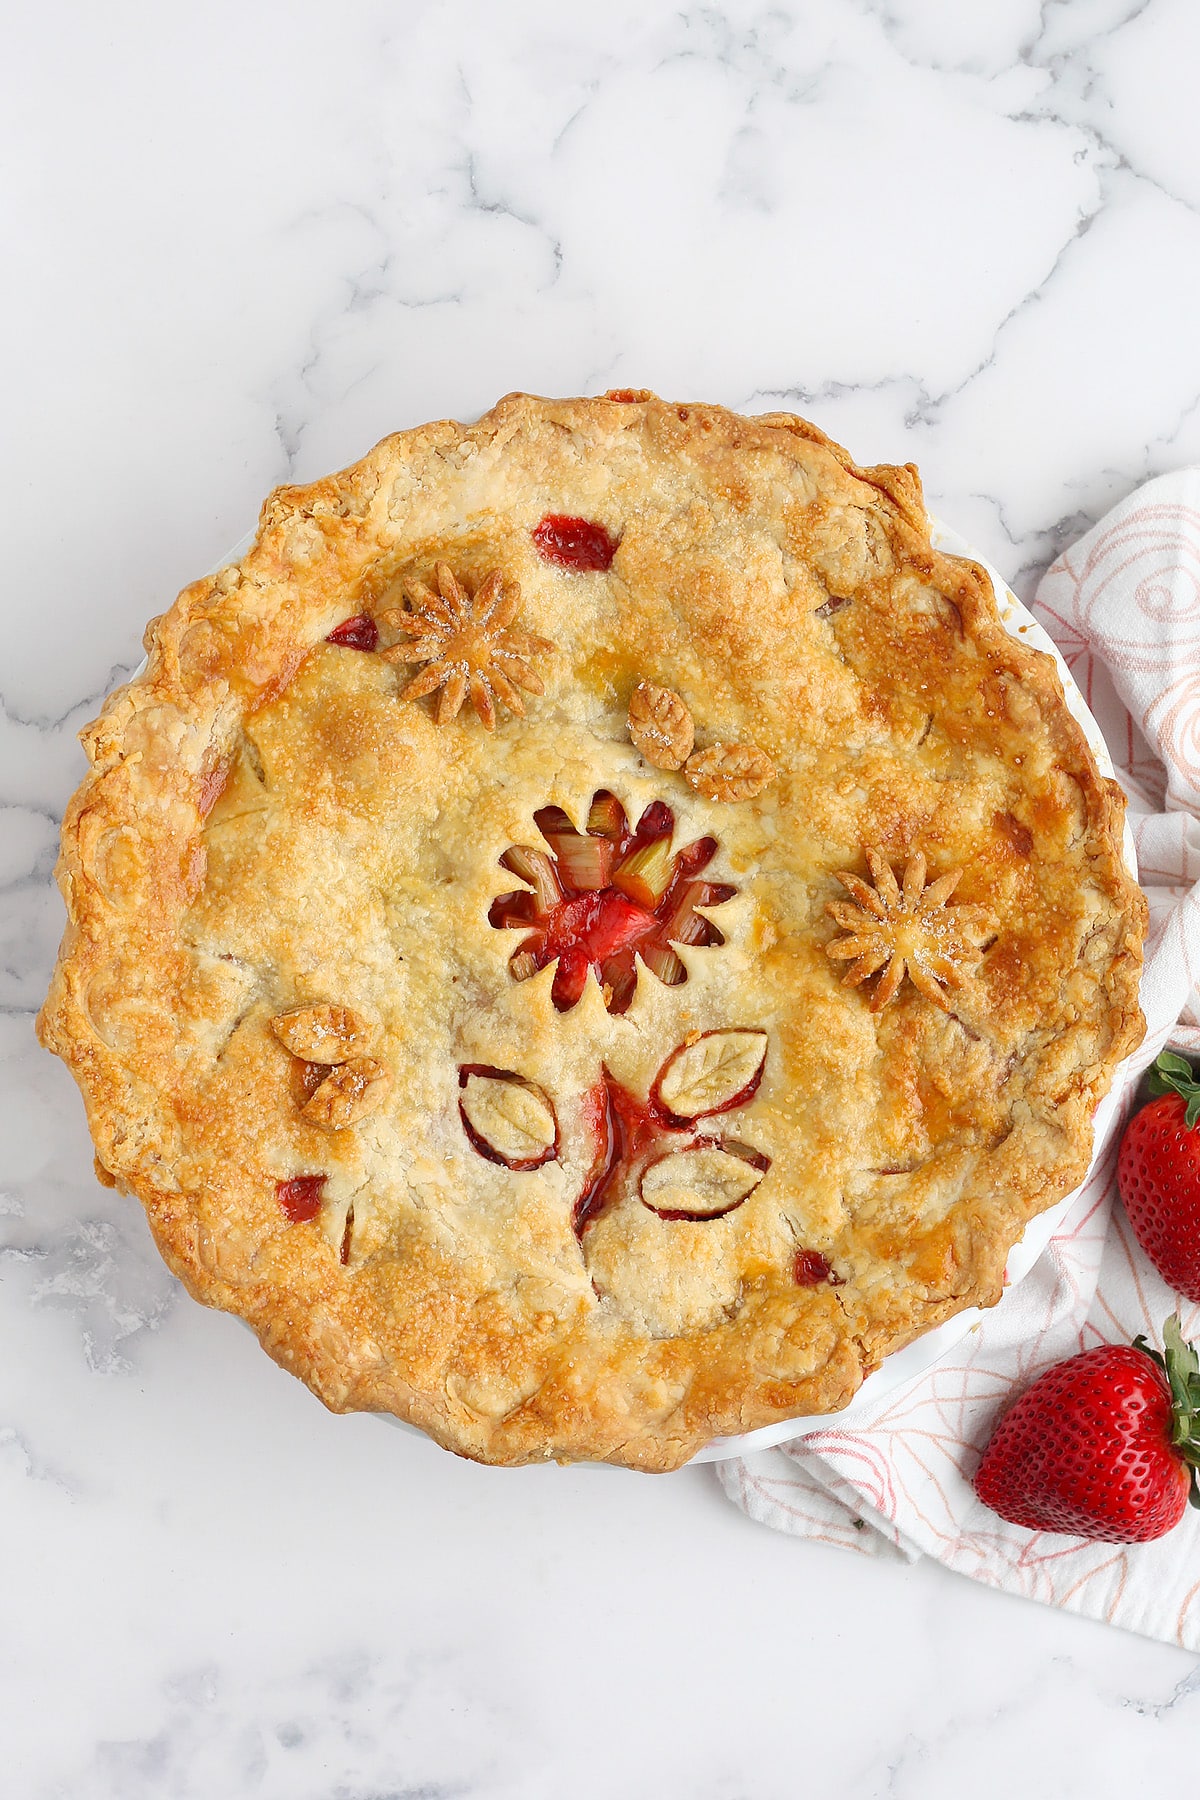 Strawberry Rhubarb Pie in a ceramic pie plate with decorative flower cut outs in the top crust.